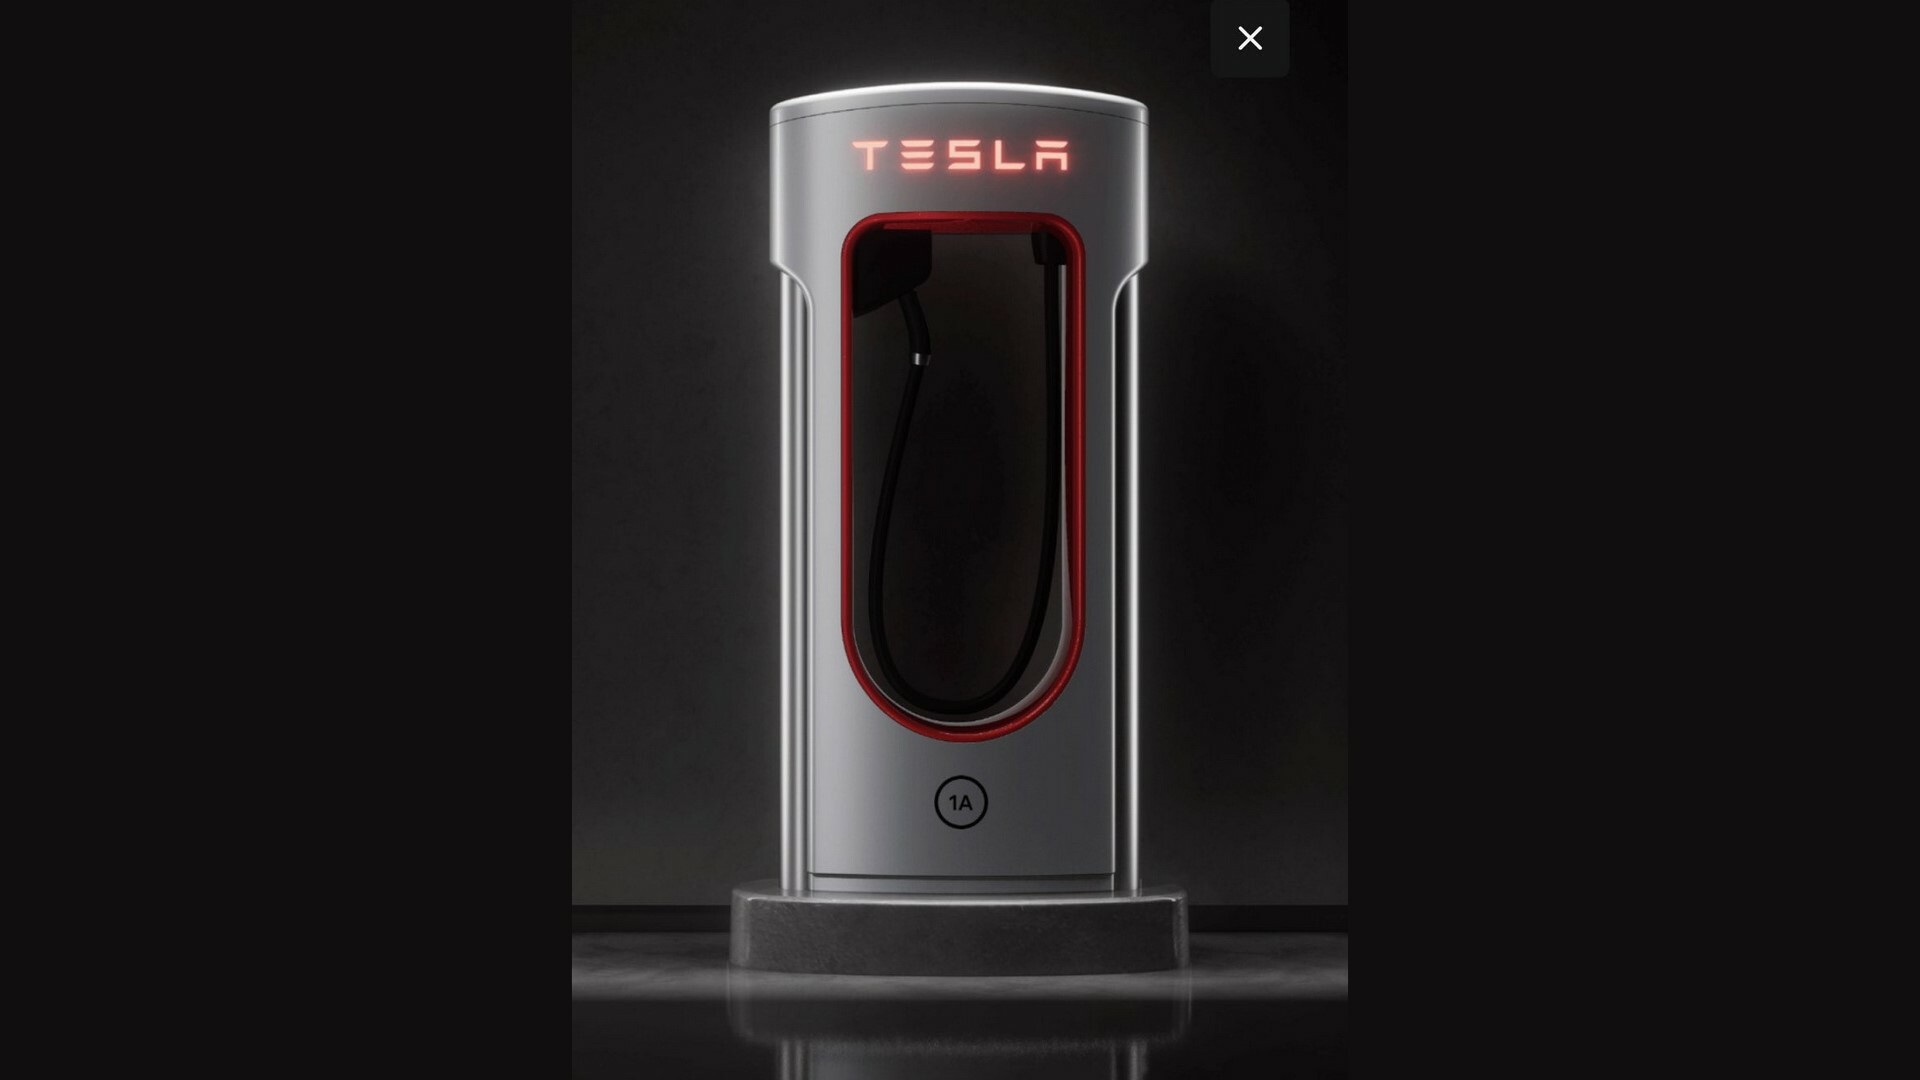 Tesla explains to us how its Magic Dock charging system works - Softonic